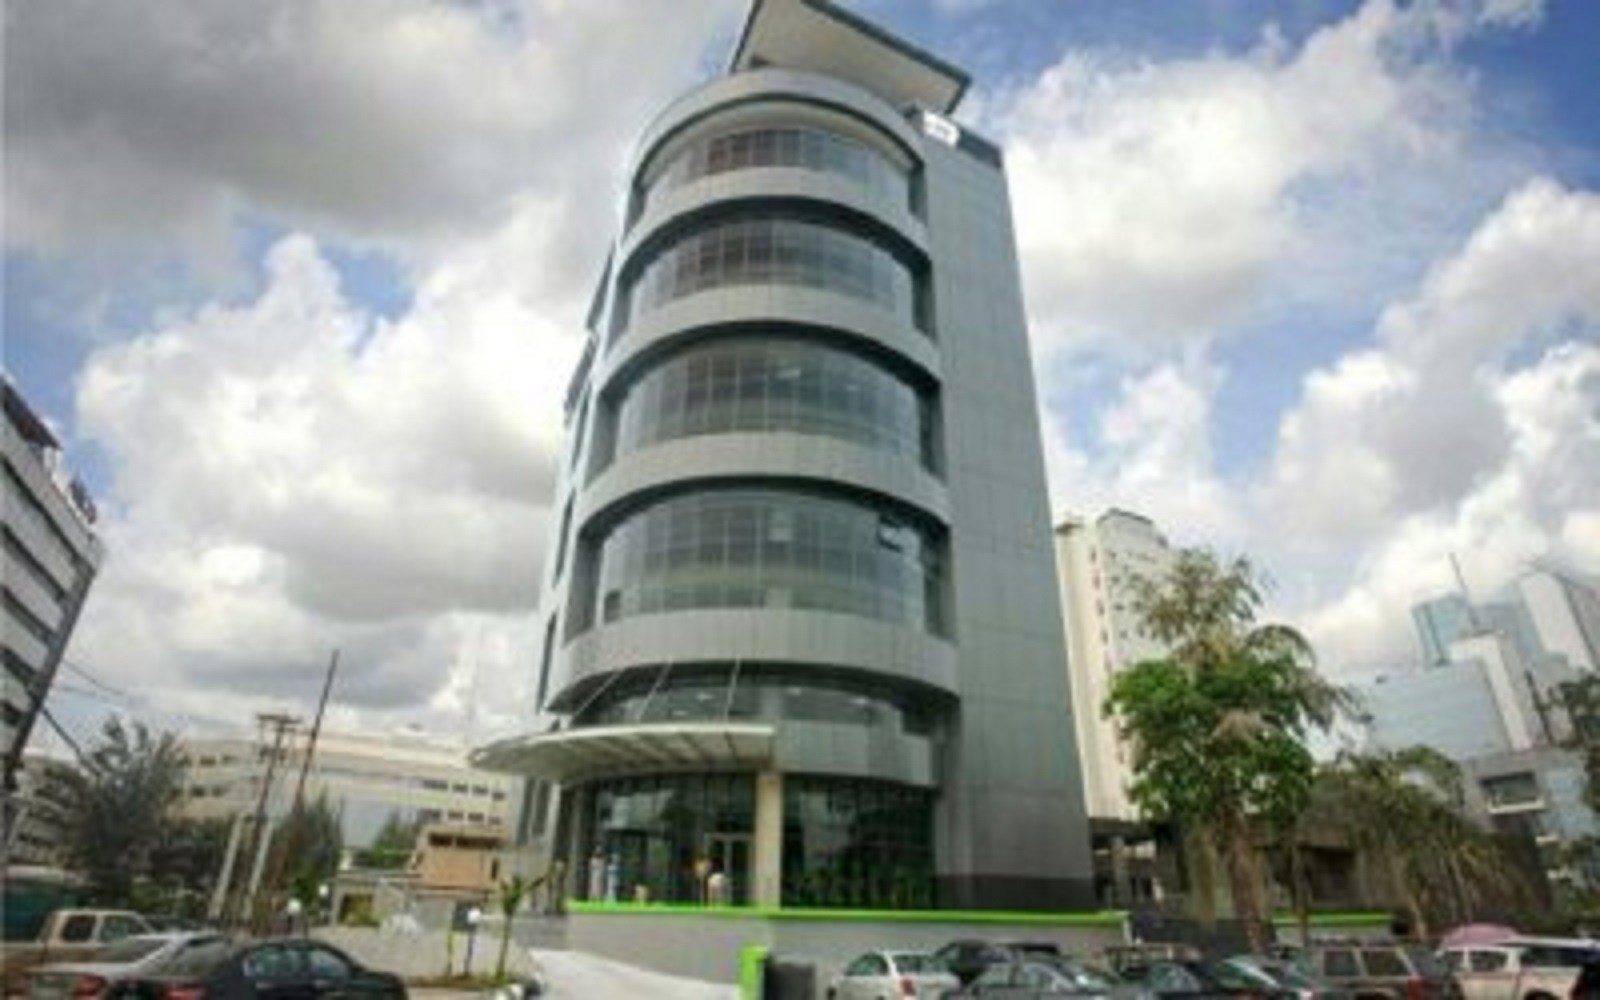 Unity Bank to sell N400 billion in bad loans to Frontier Capital